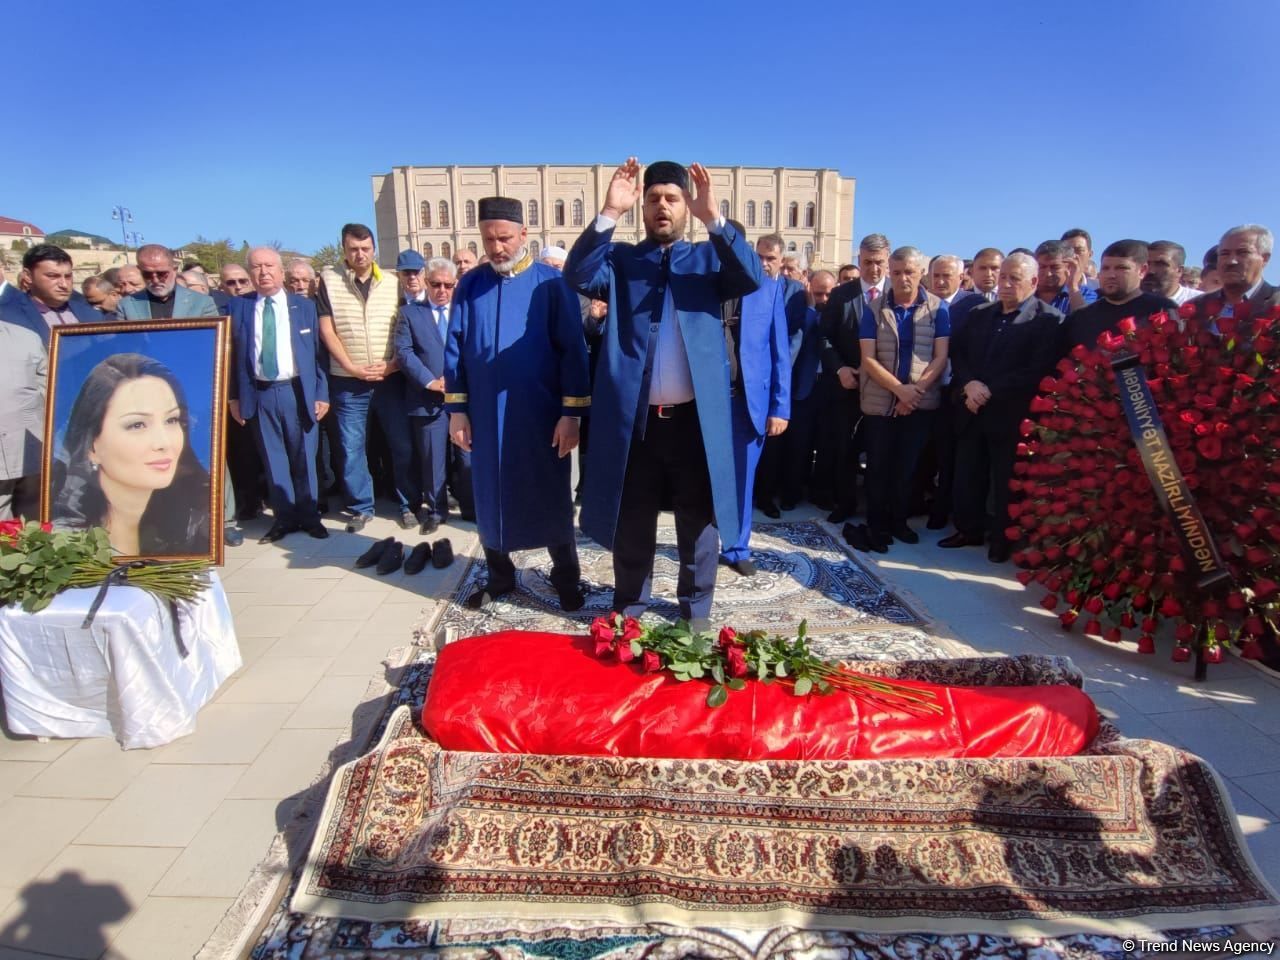 Farewell for Azerbaijani MP being held at Heydar Mosque [PHOTOS\VIDEO]